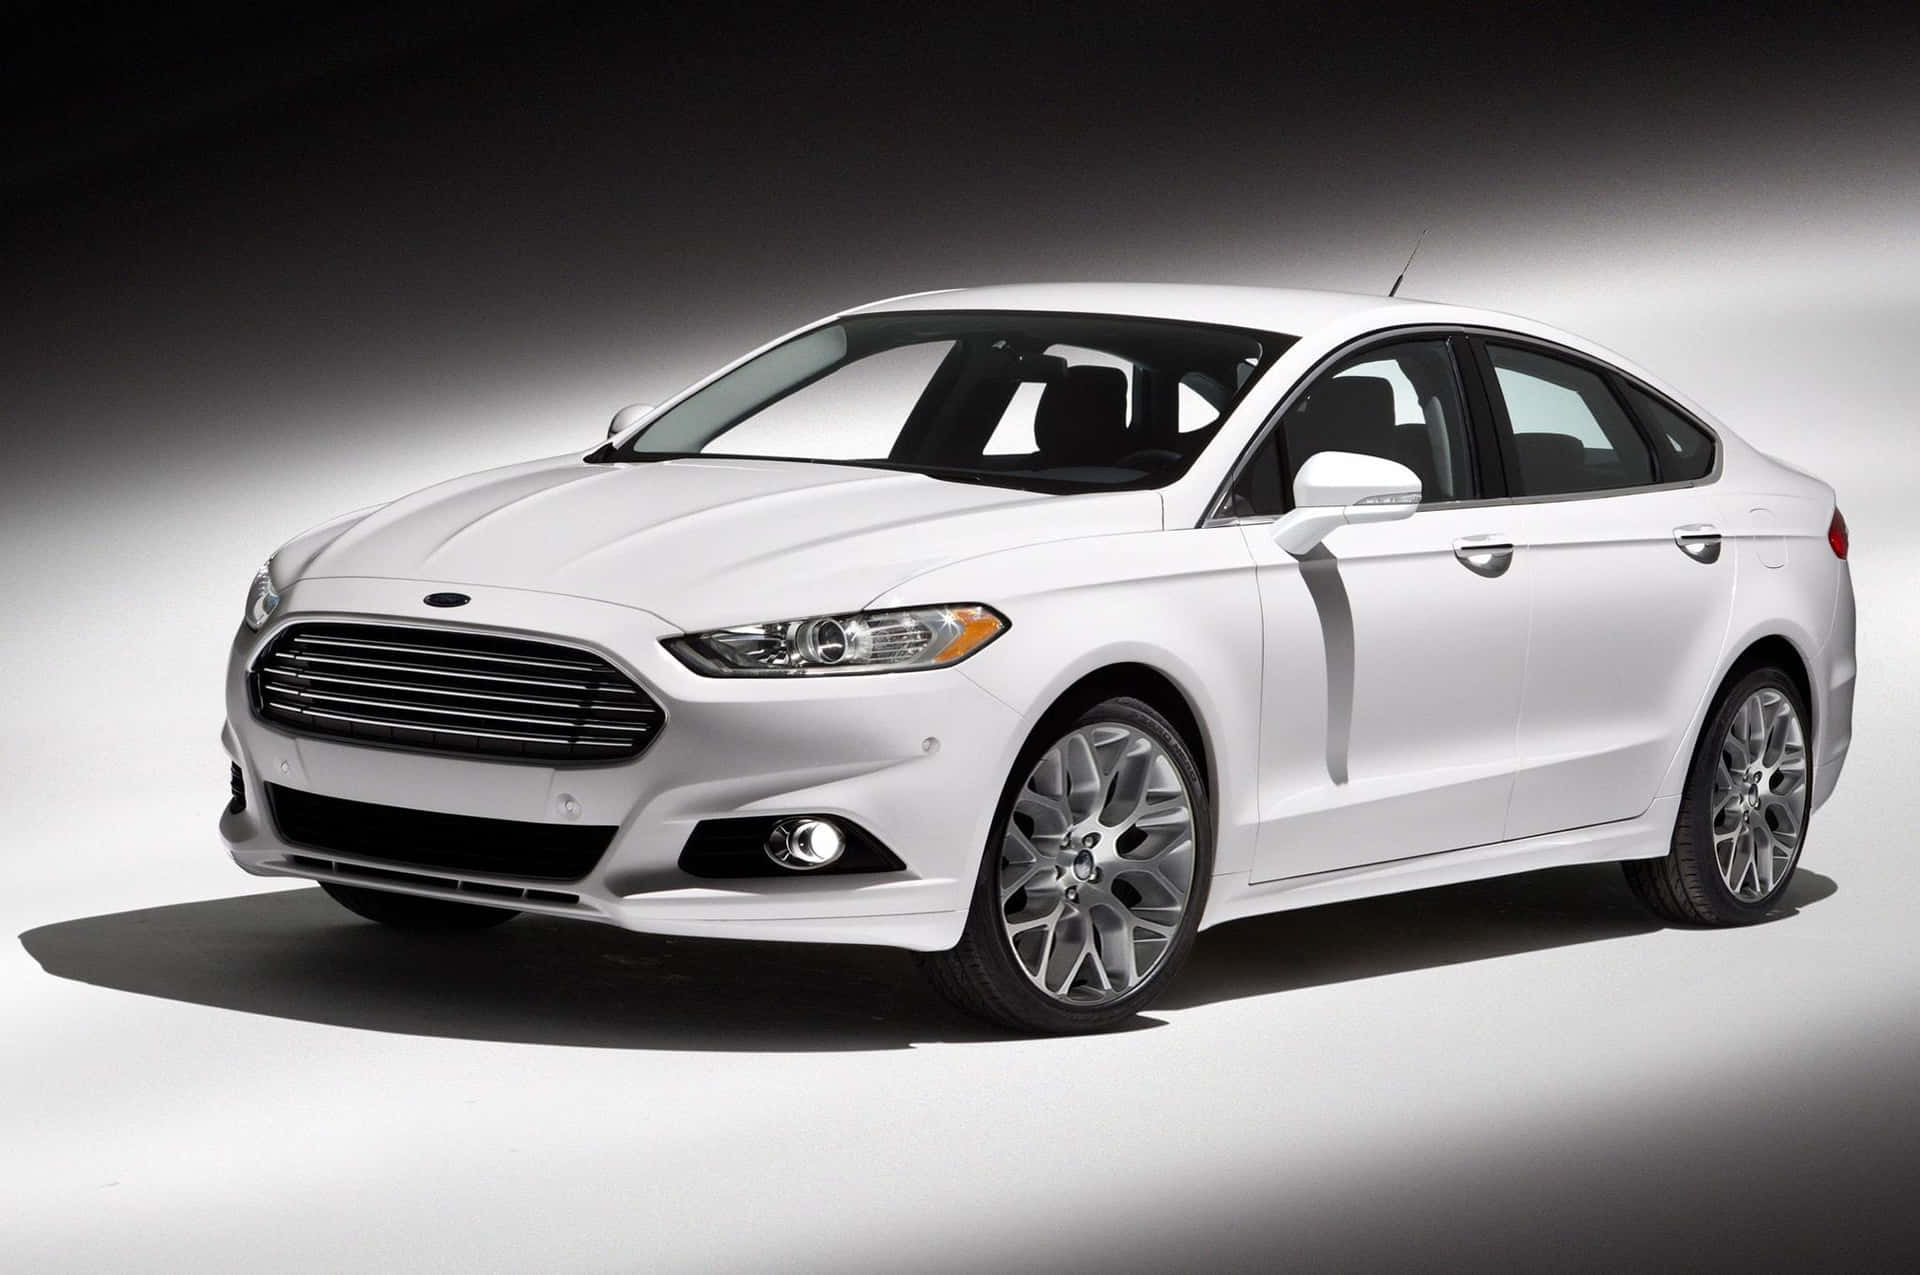 Sleek Ford Fusion cruising on the open road. Wallpaper